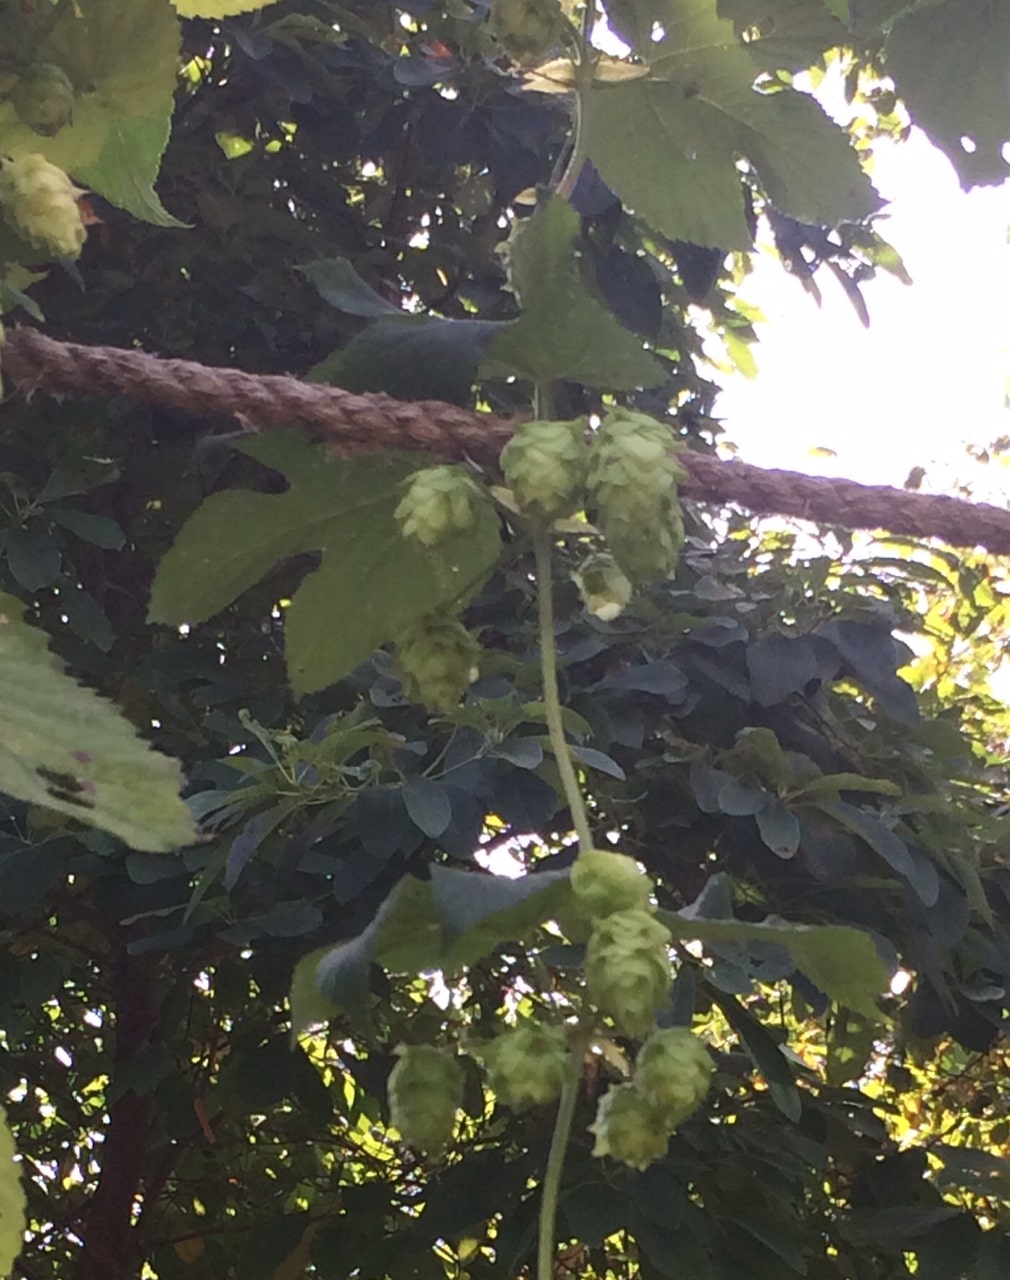 Hops waiting to be picked